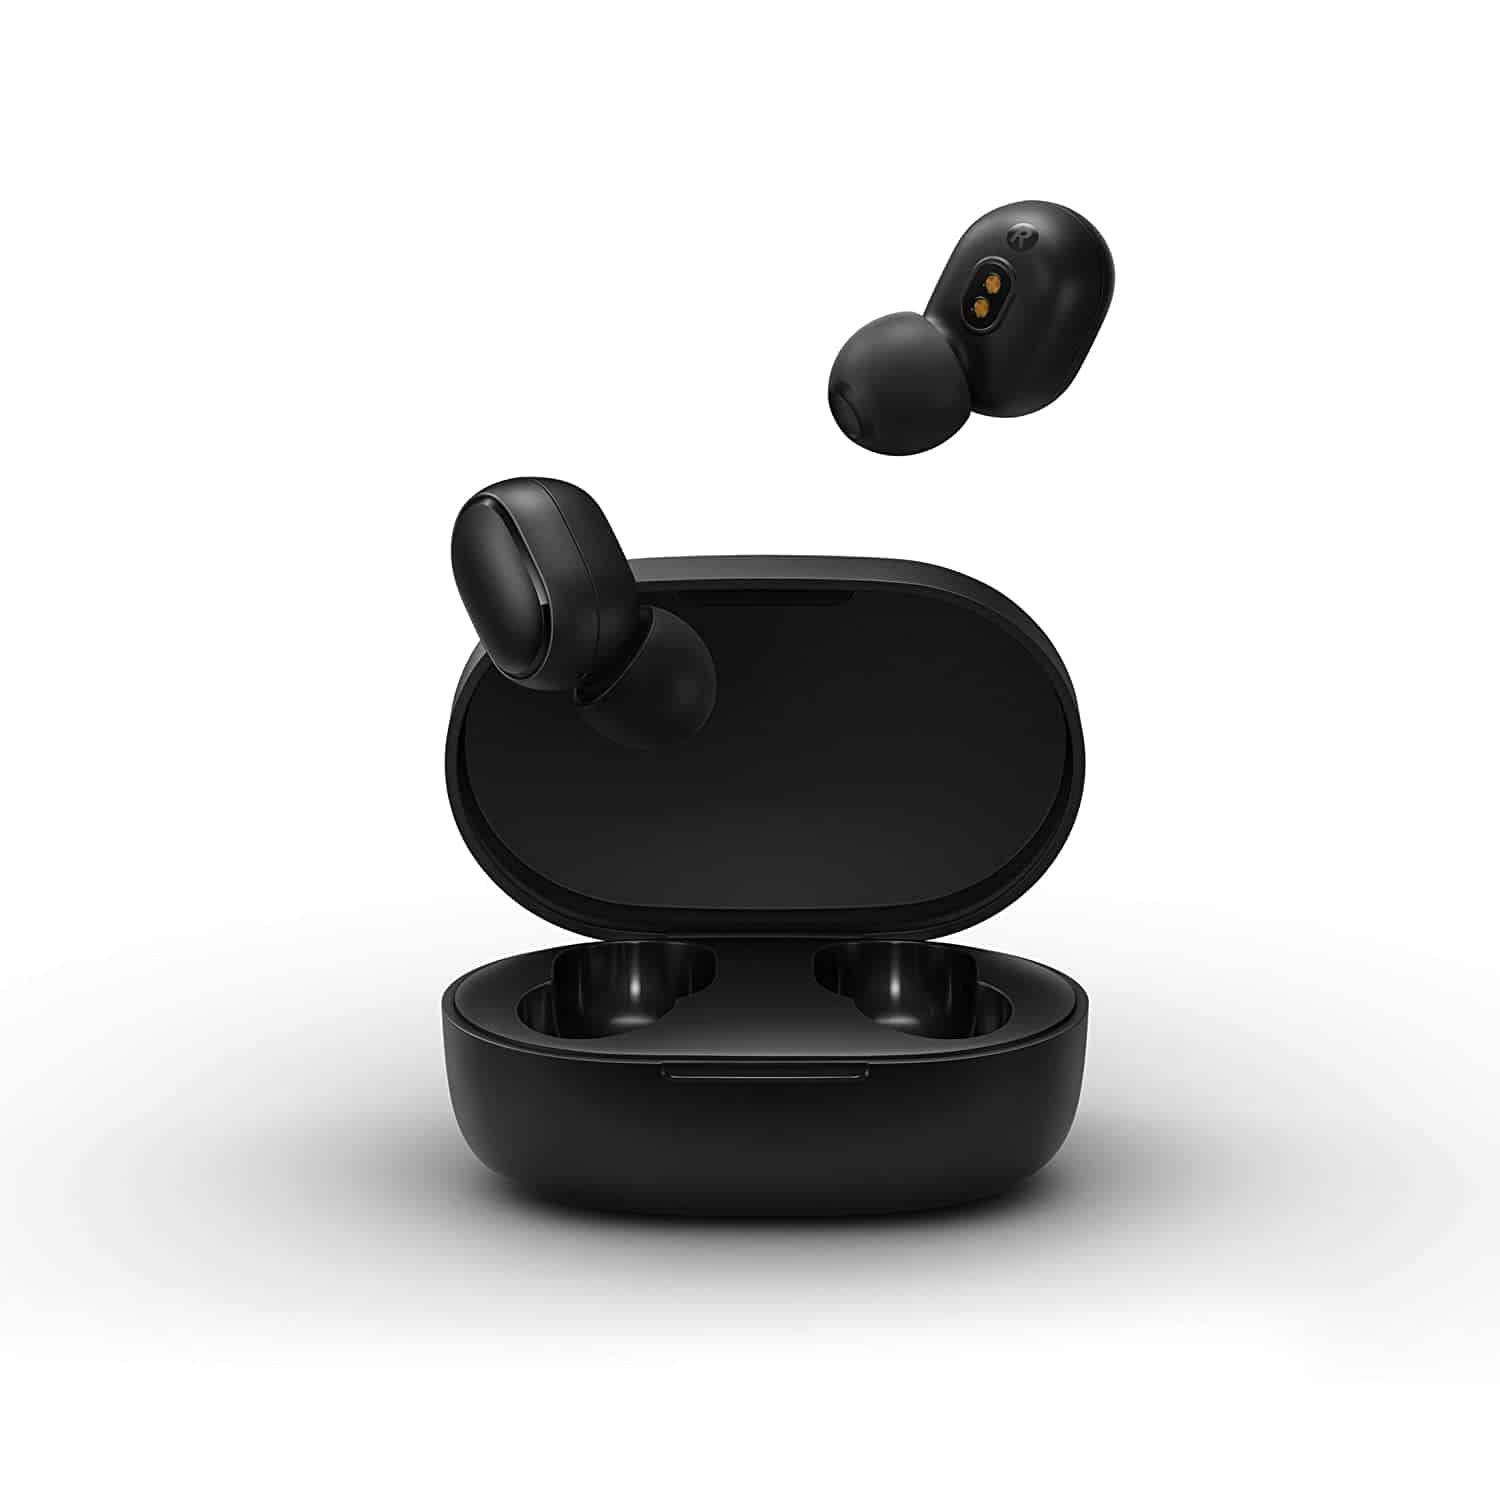 The Redmi Earbuds S